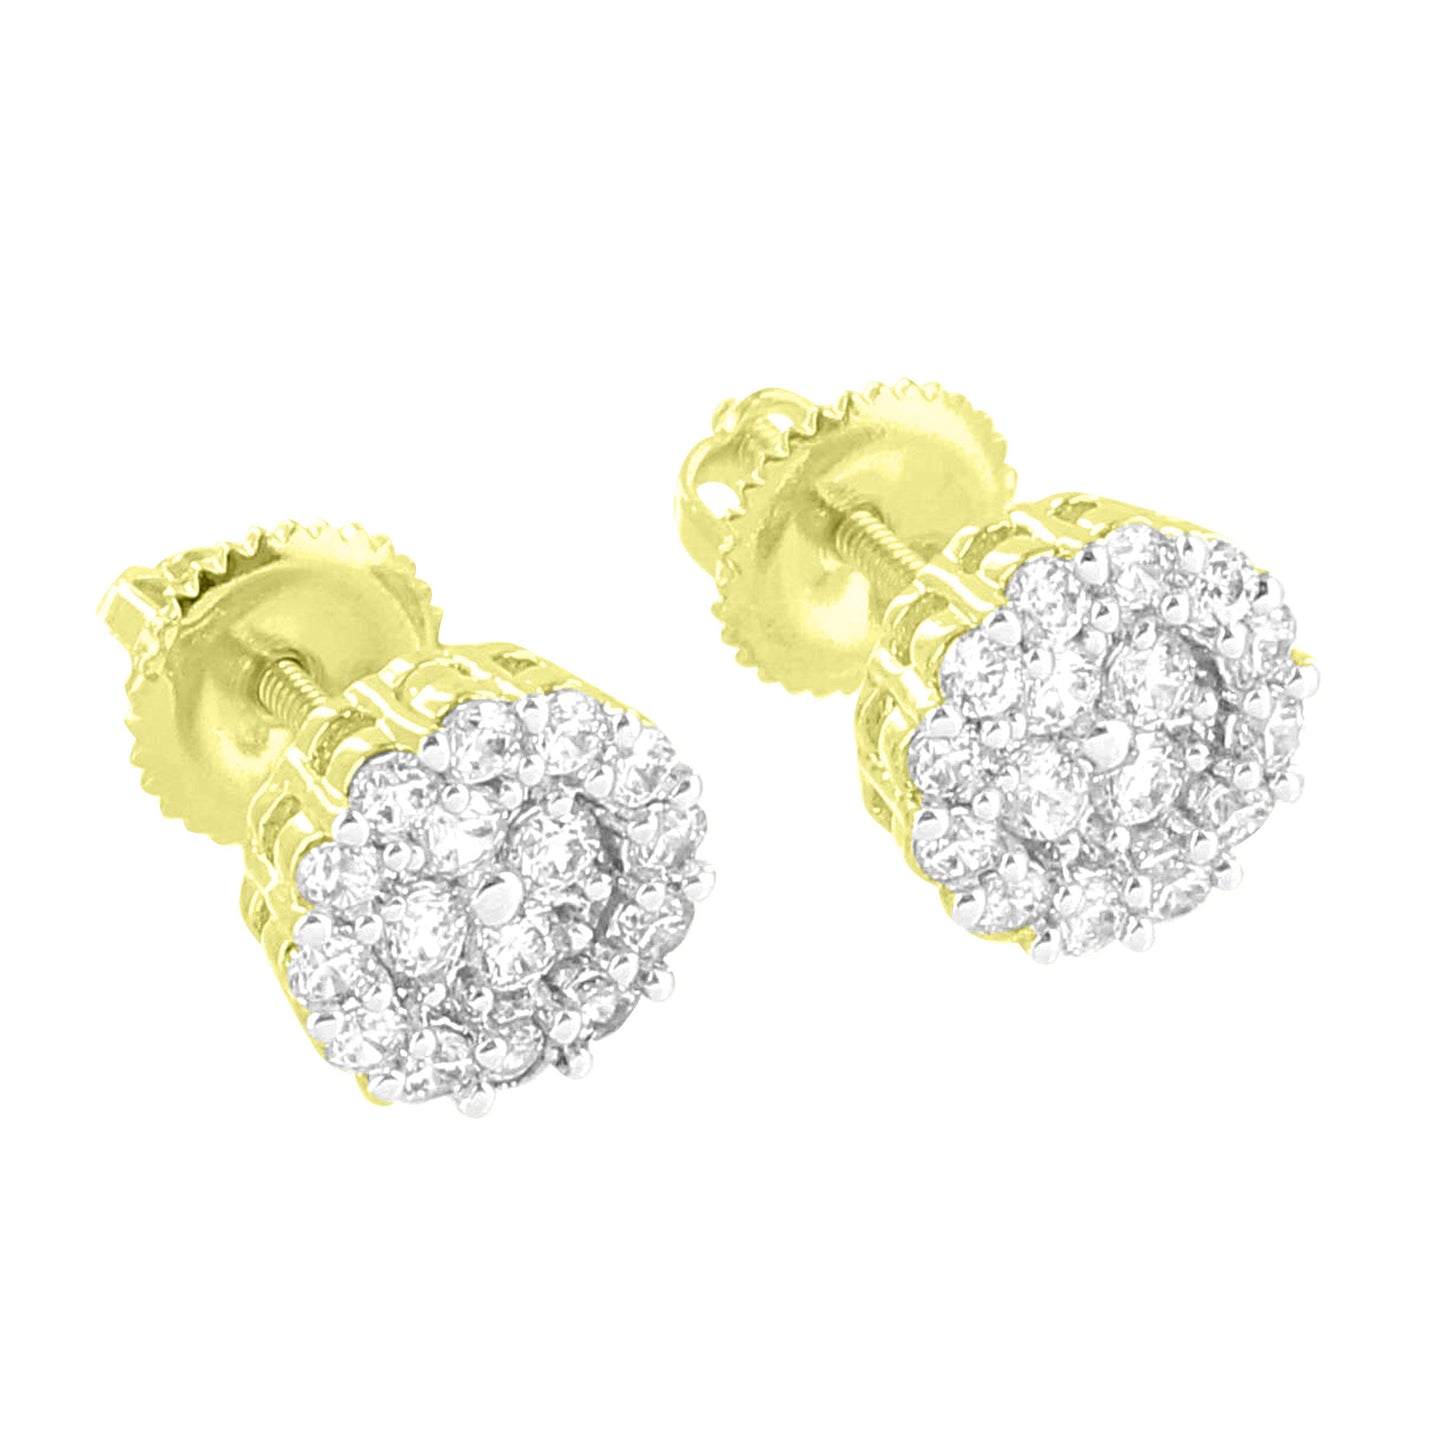 Round Cluster Set Earrings Screw On Bling Simulated Diamonds 14K Gold Finish Studs